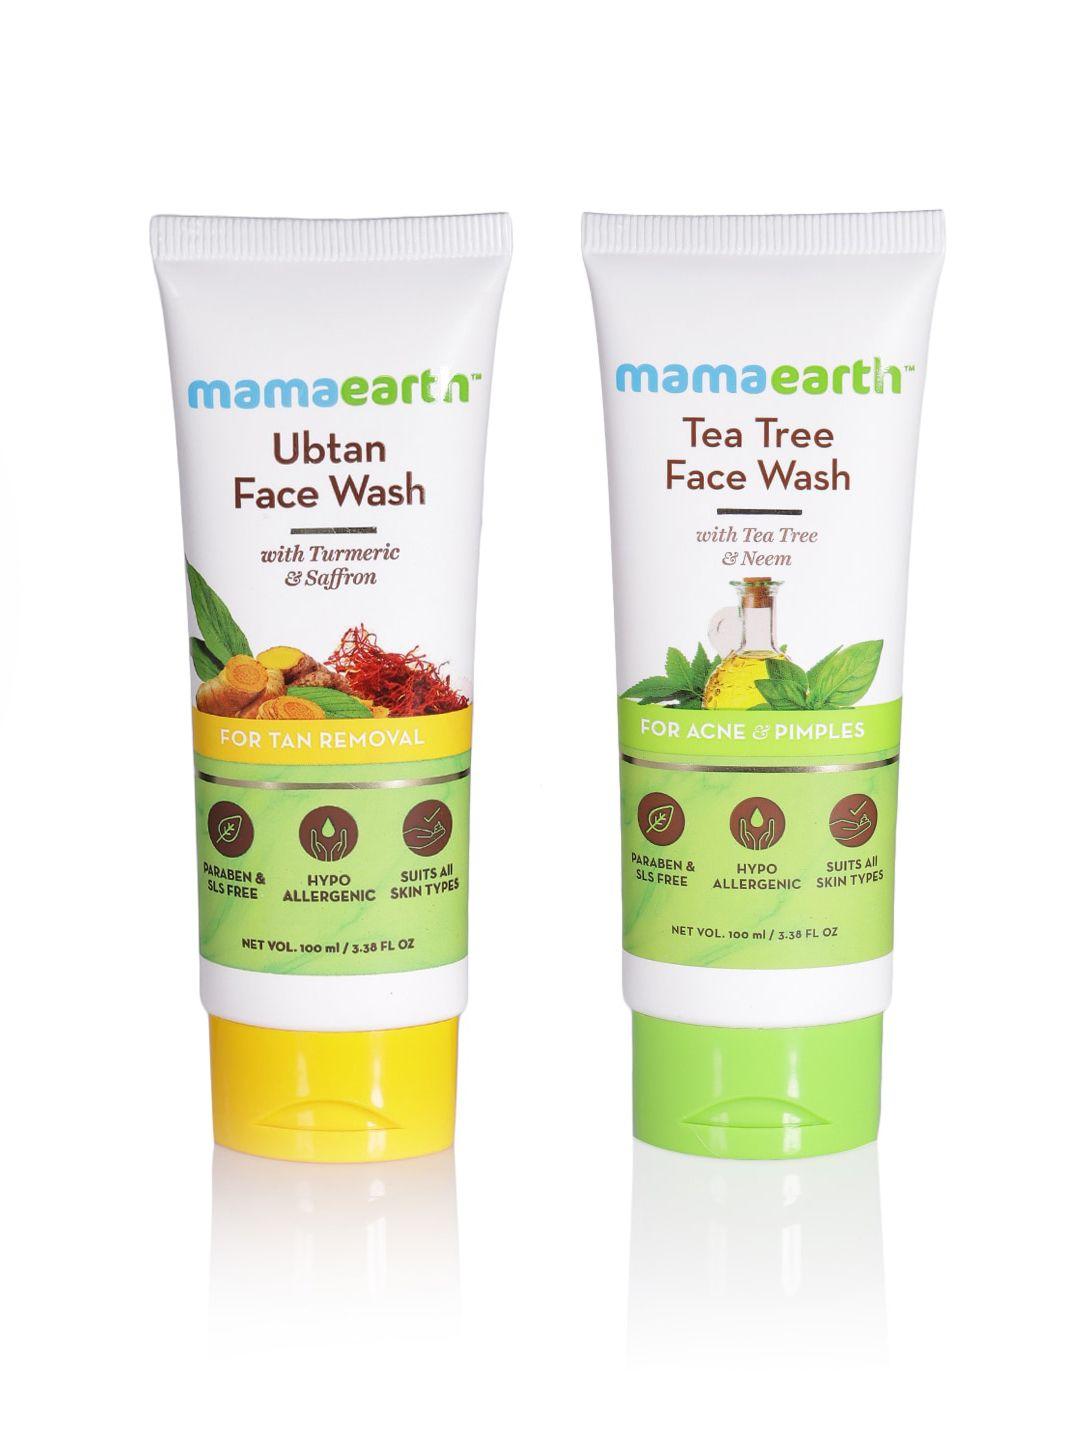 mamaearth set of sustainable ubtan tan removal face wash & tea tree face wash